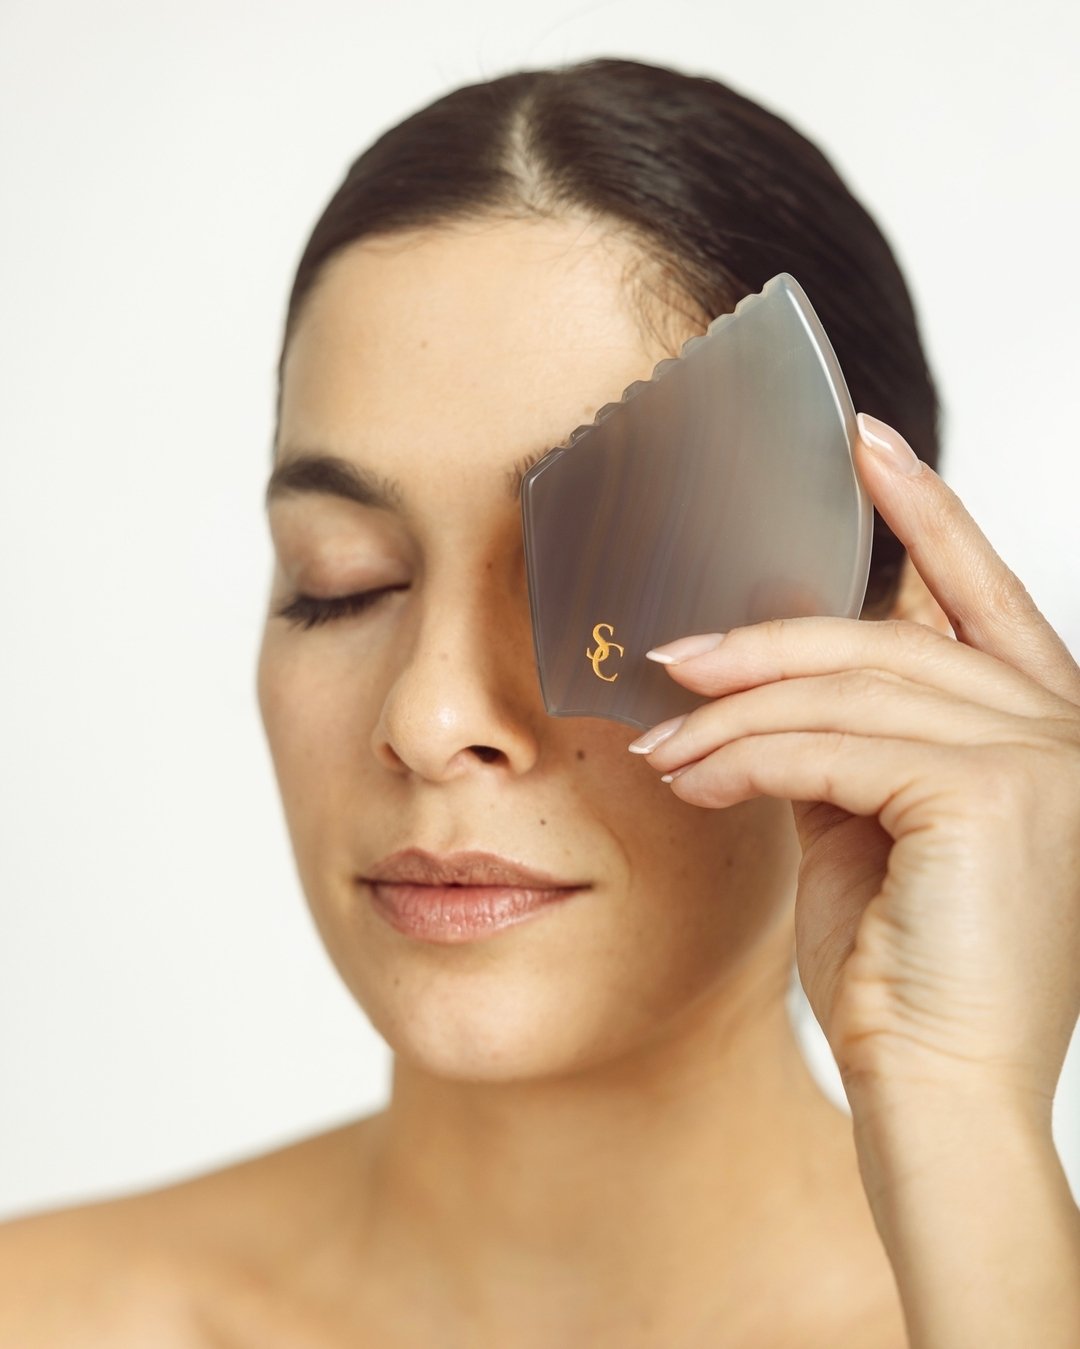 Transform your skincare routine with Gua Sha: ancient beauty secrets for a radiant, sculpted complexion.